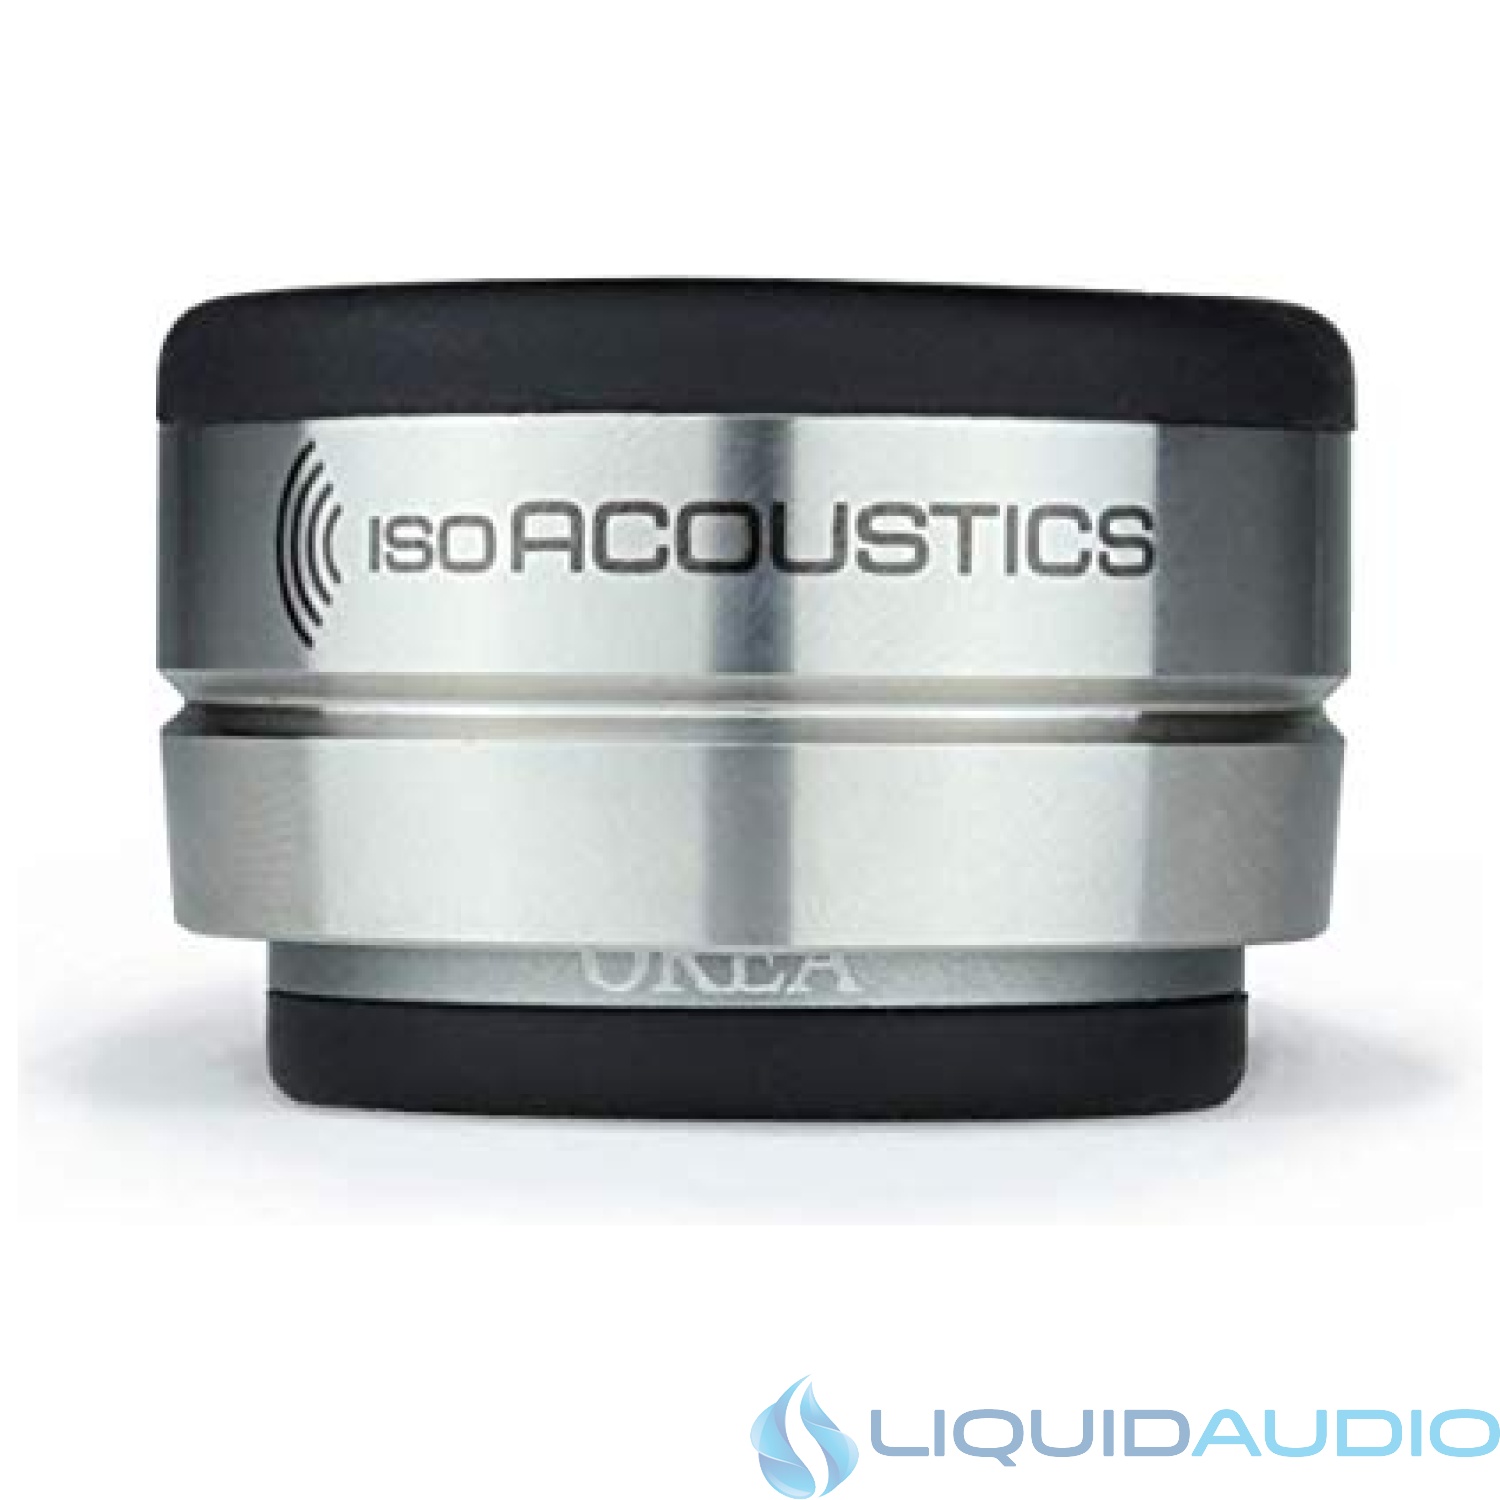 IsoAcoustics OREA Graphite Isolator Feet for Audio Components and Turntables